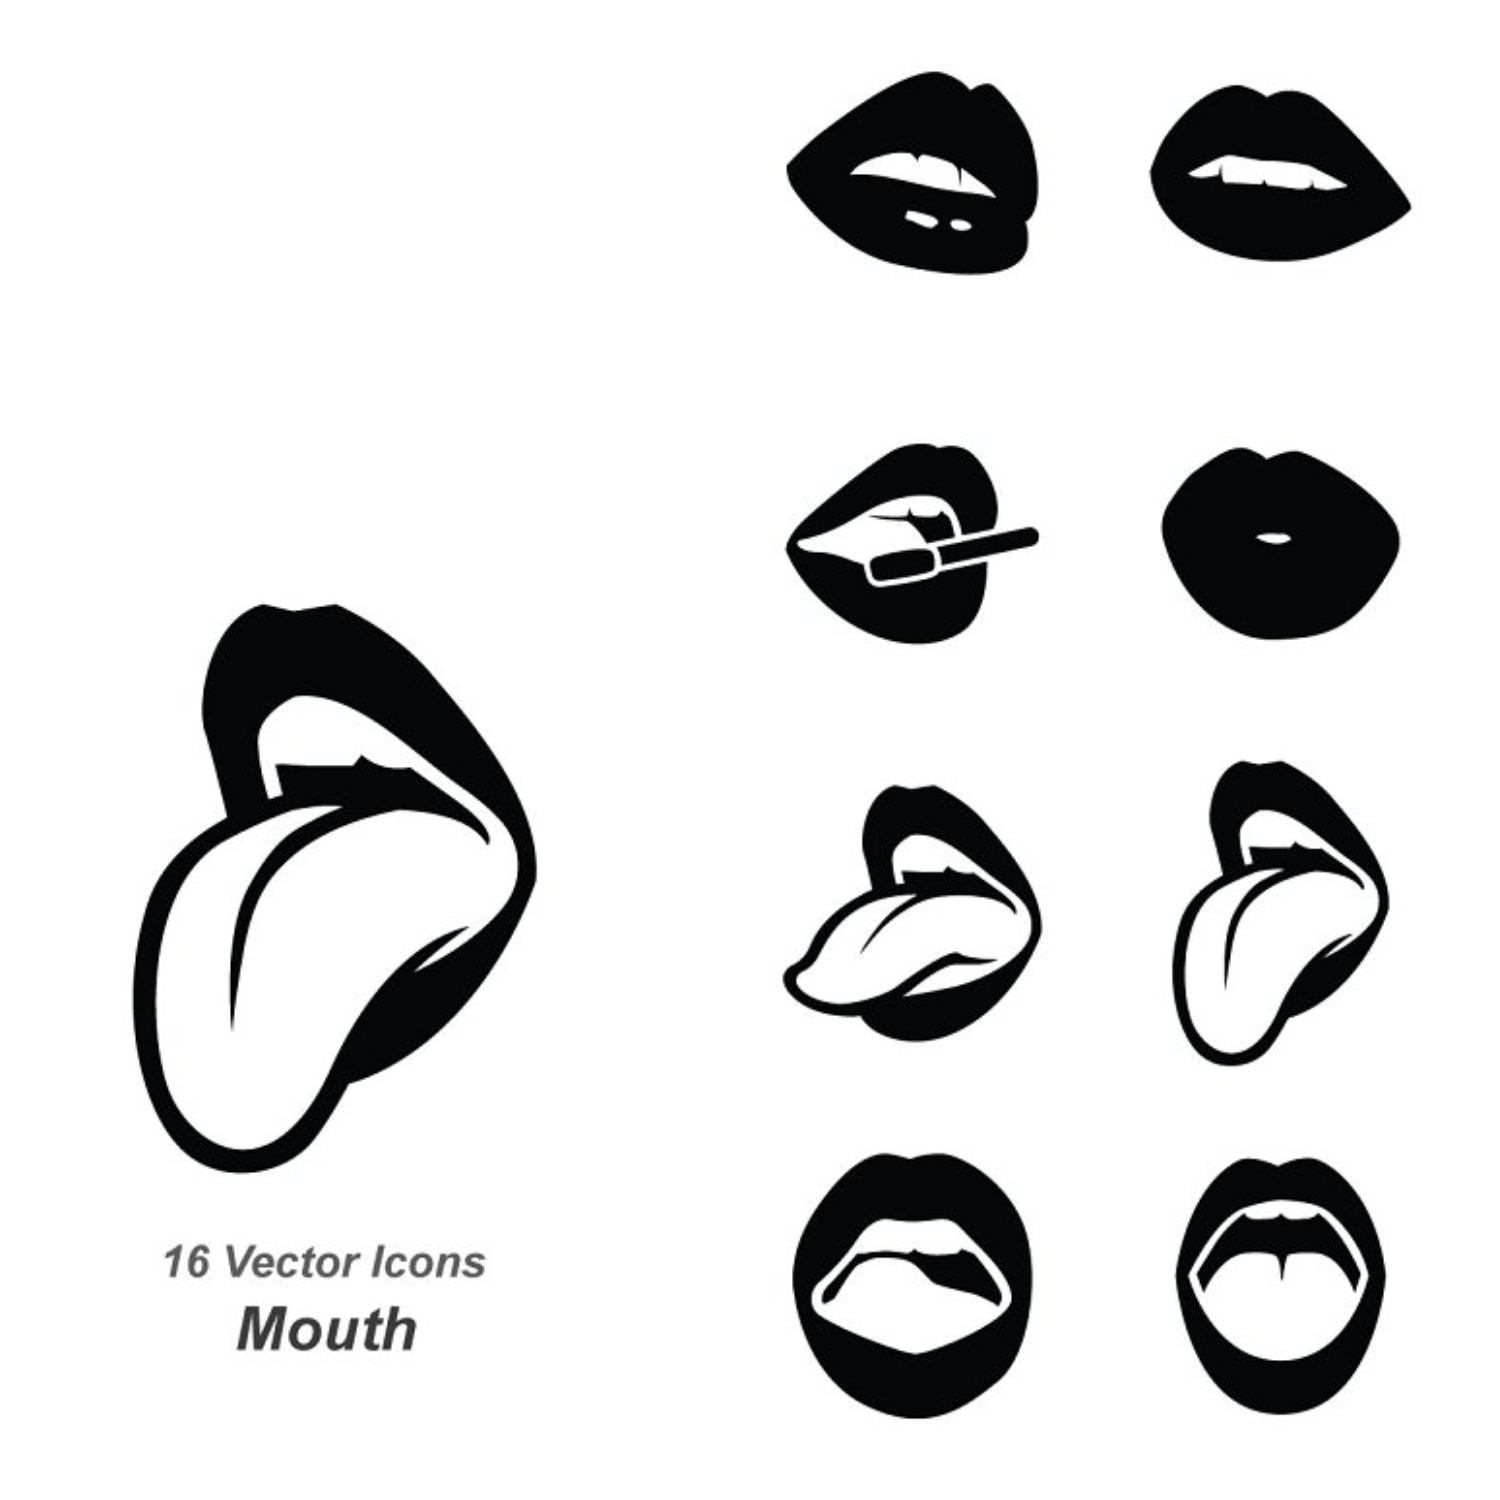 Mouth Outline Vector Icons